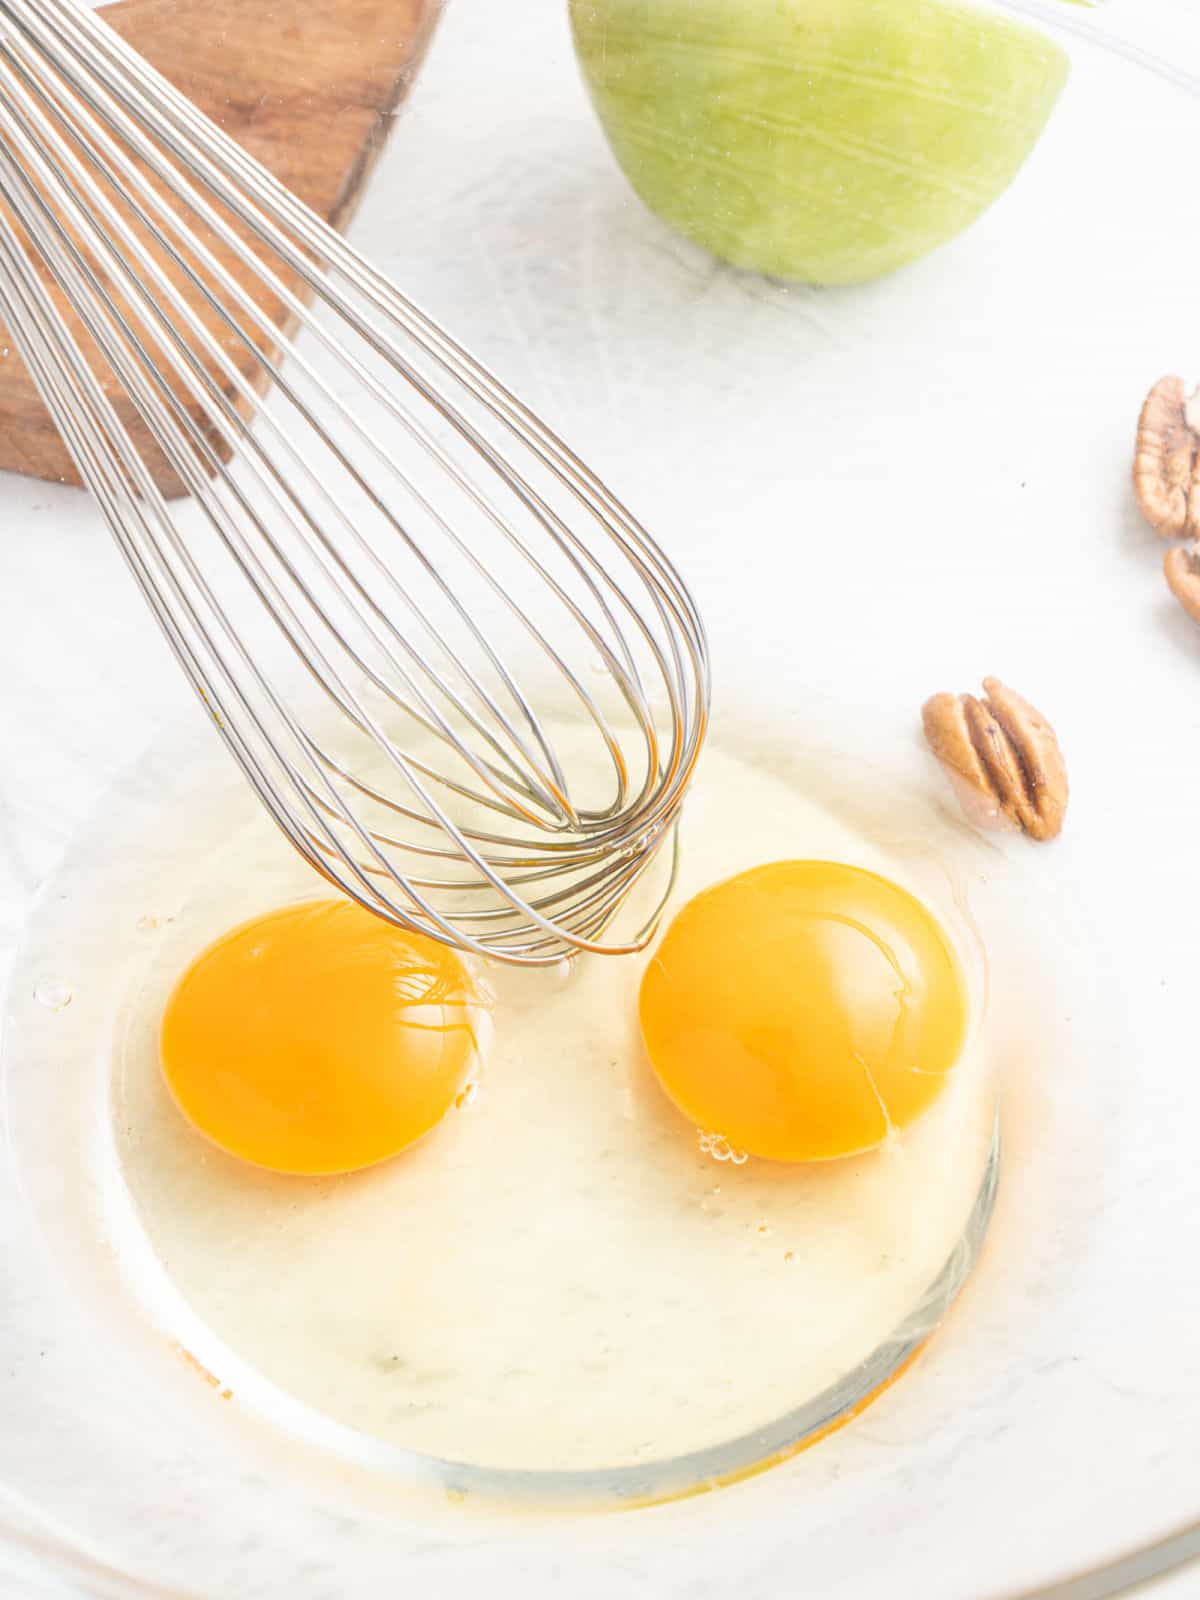 Eggs and oil in a glass bowl with a whisk on a white surface.